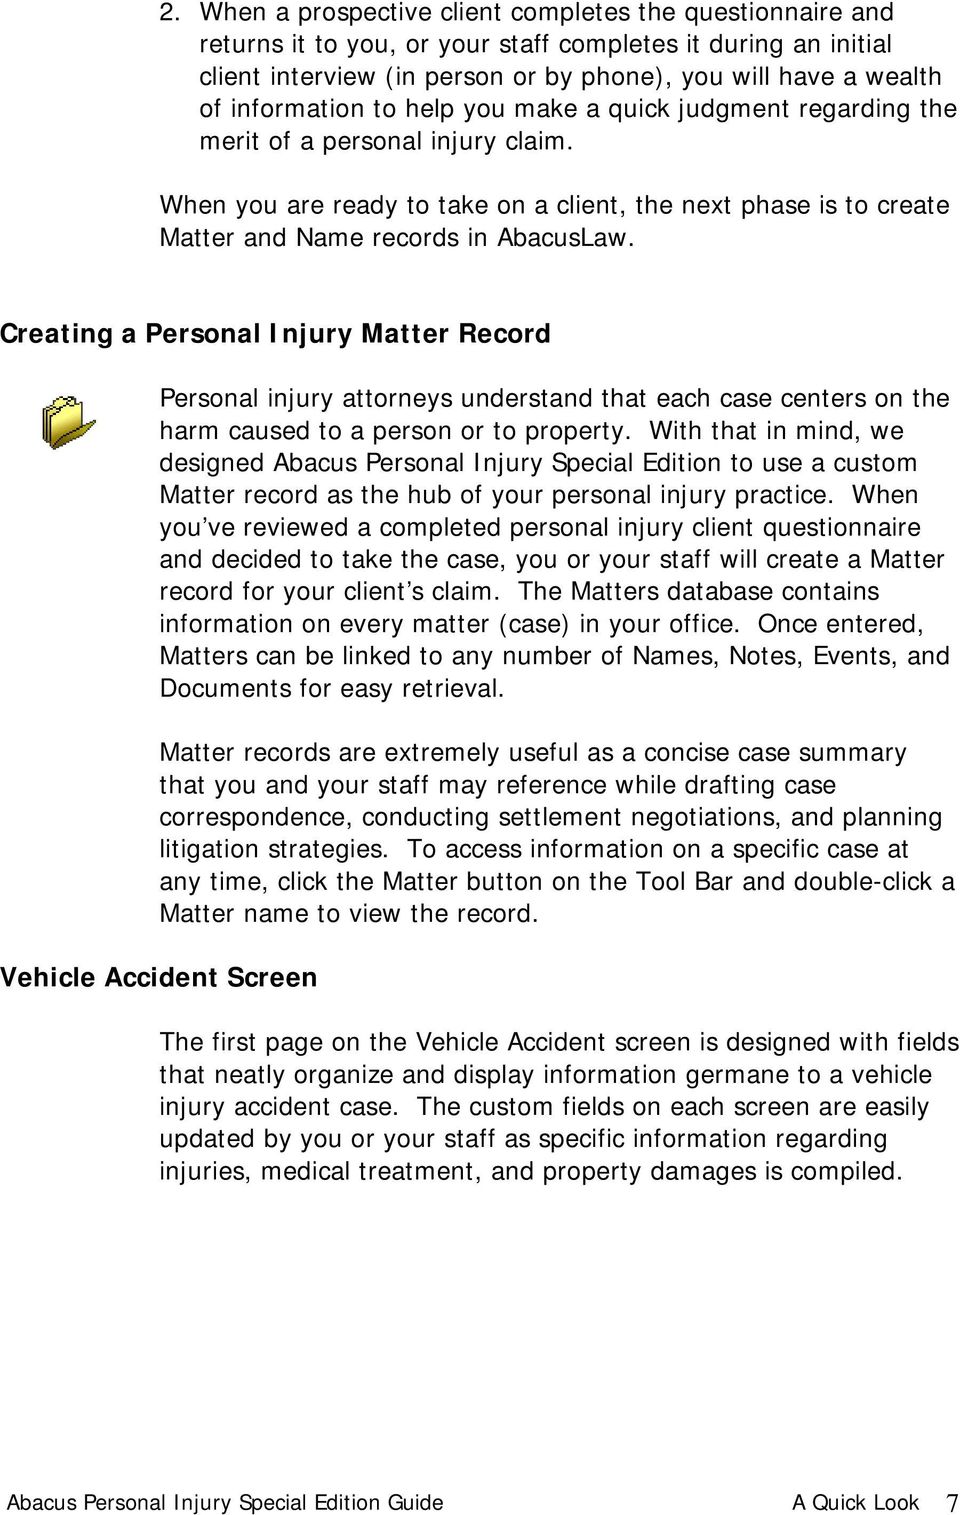 Creating a Personal Injury Matter Record Personal injury attorneys understand that each case centers on the harm caused to a person or to property.